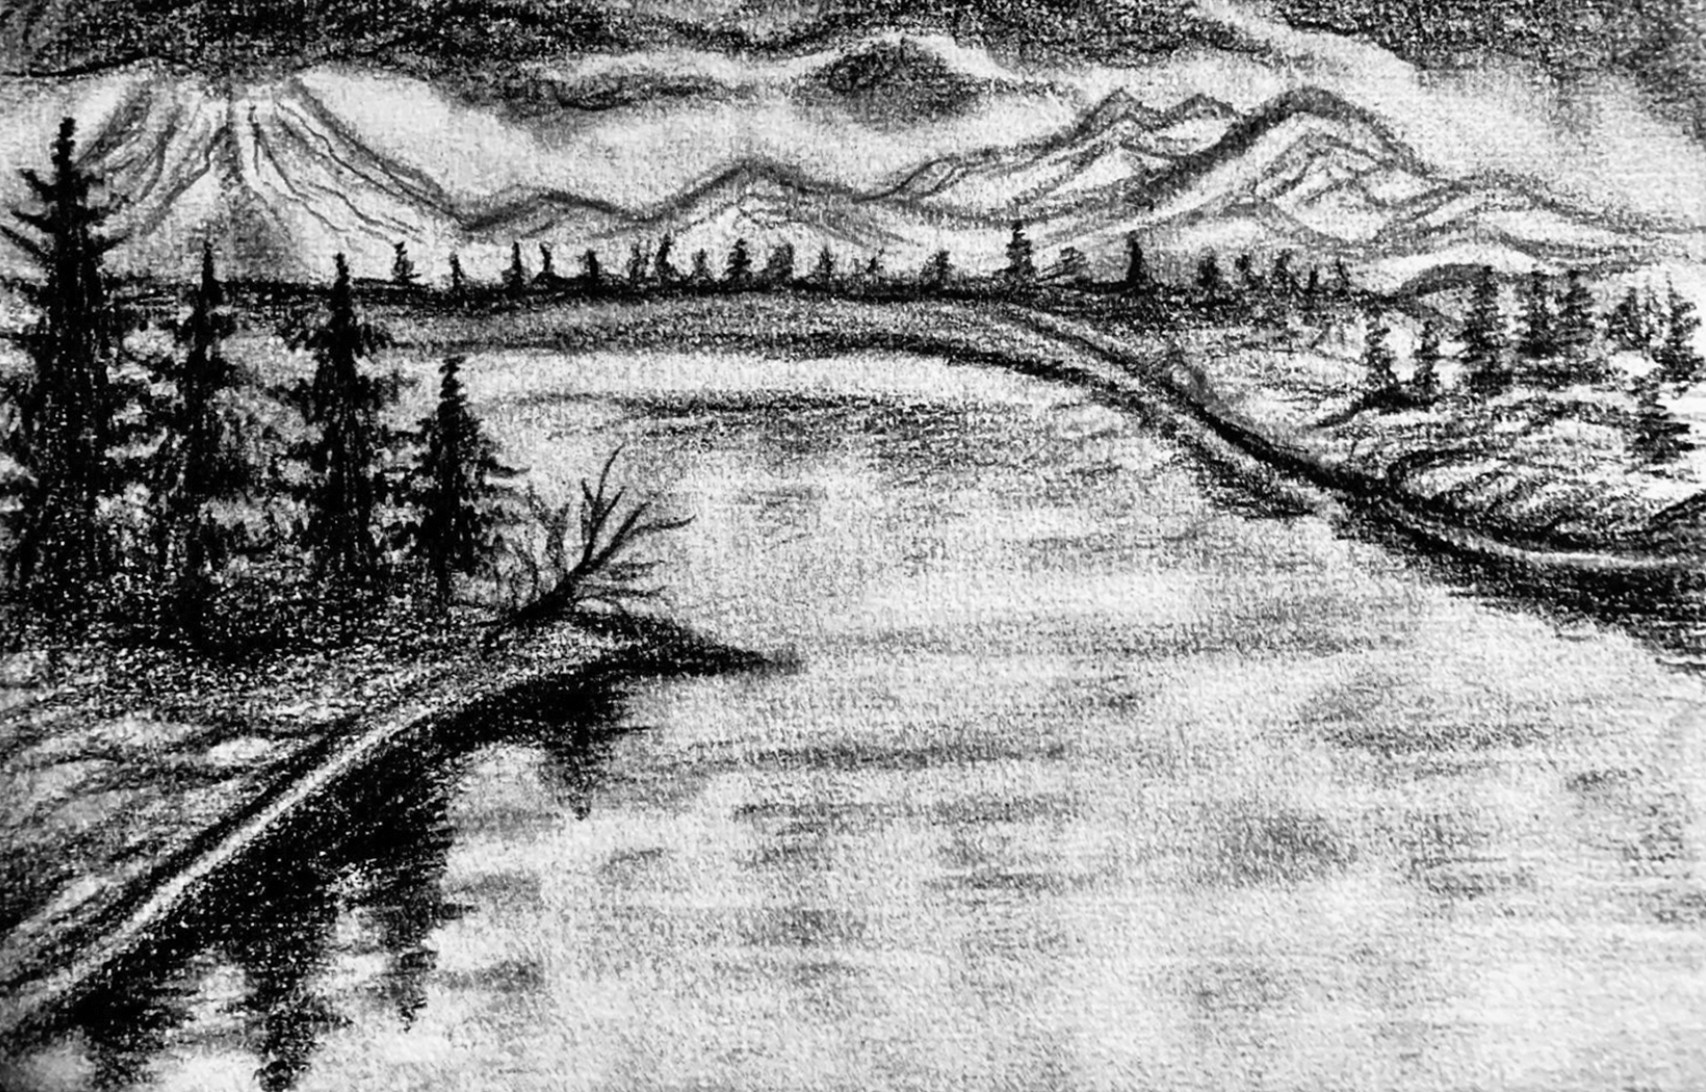 Drawing of body of water with trees on the left and mountains in the distance